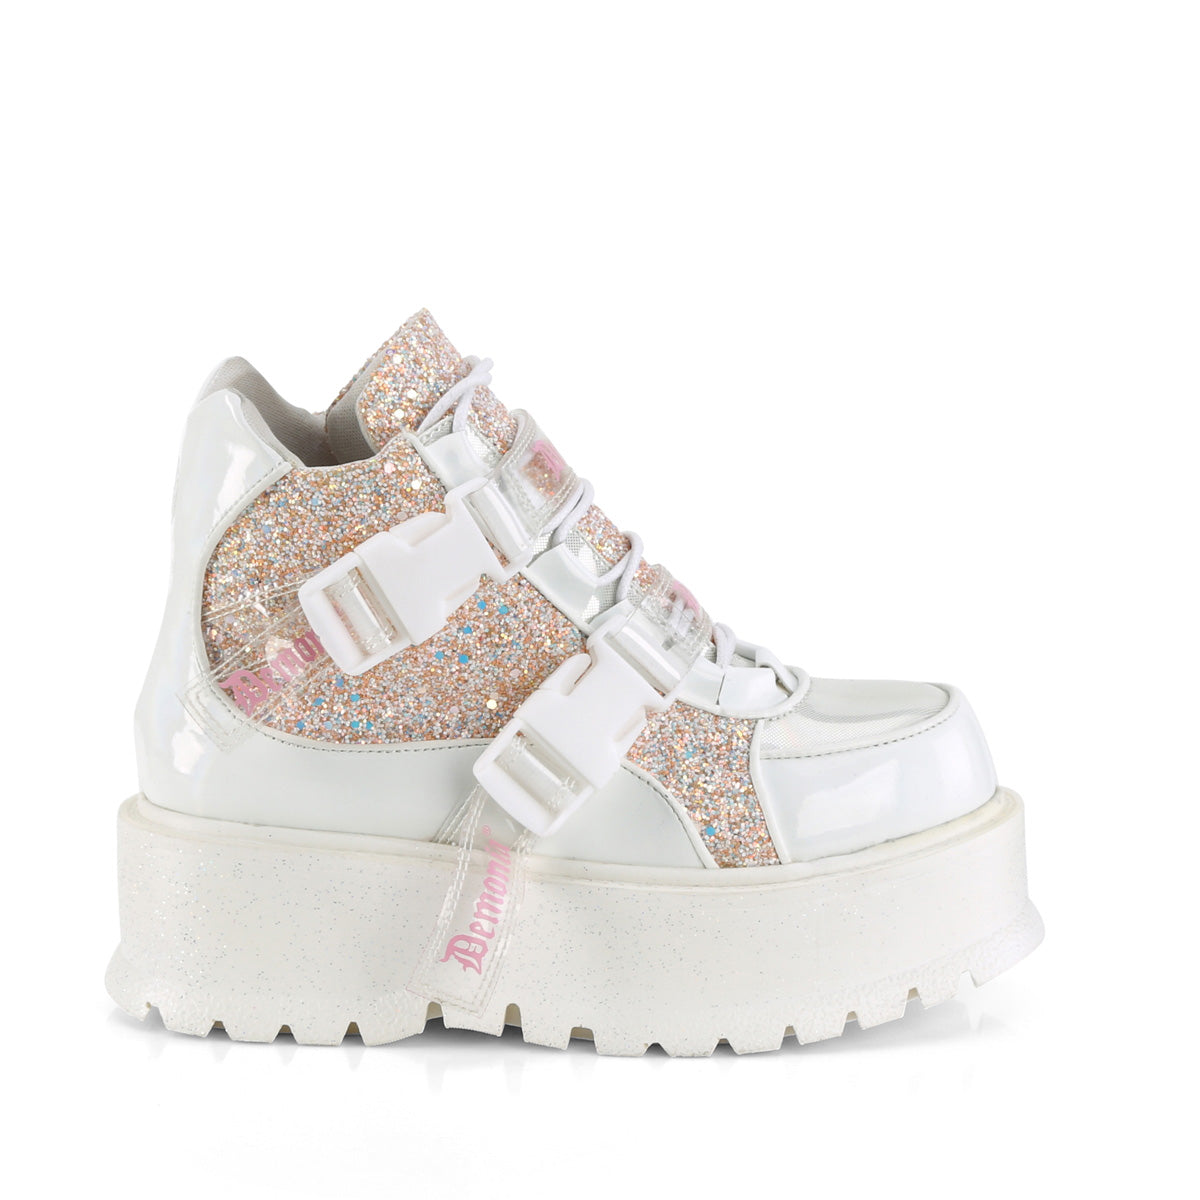 White Holographic Glitter Platform Sneakers